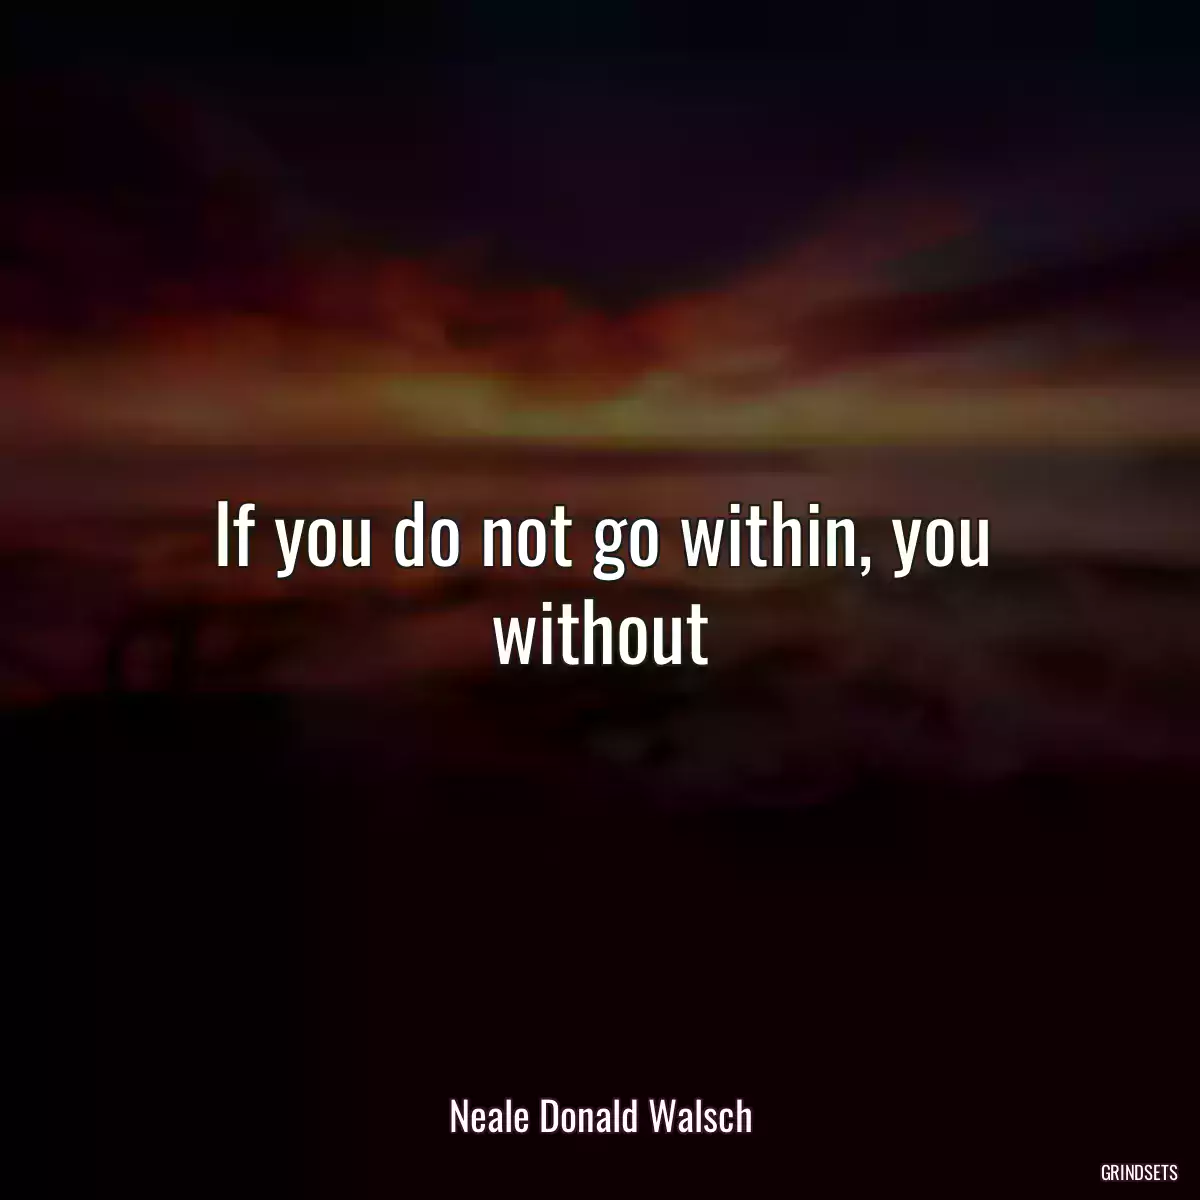 If you do not go within, you without